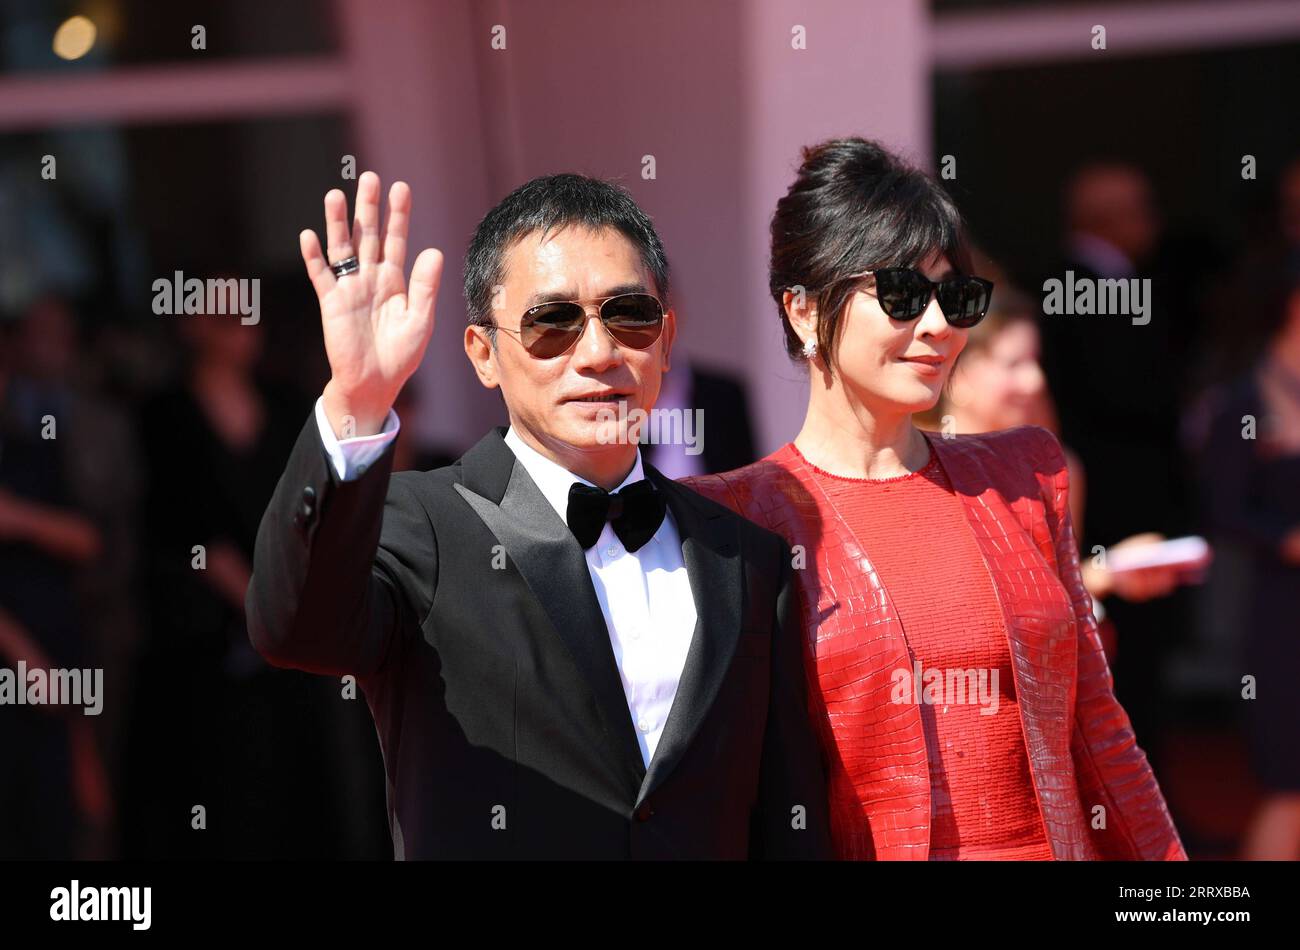 230902 -- VENICE, Sept. 2, 2023 -- Actor Tony Leung Chiu-Wai L and actress Carina Lau pose during the 80th Venice International Film Festival in Venice, Italy, on Sept. 2, 2023. Tony Leung Chiu-Wai of Hong Kong, China was presented with the Golden Lion for Lifetime Achievement during the event on Saturday.  ITALY-VENICE-FILM FESTIVAL-TONY LEUNG CHIU-WAI-GOLDEN LION-LIFETIME ACHIEVEMENT JinxMamengni PUBLICATIONxNOTxINxCHN Stock Photo